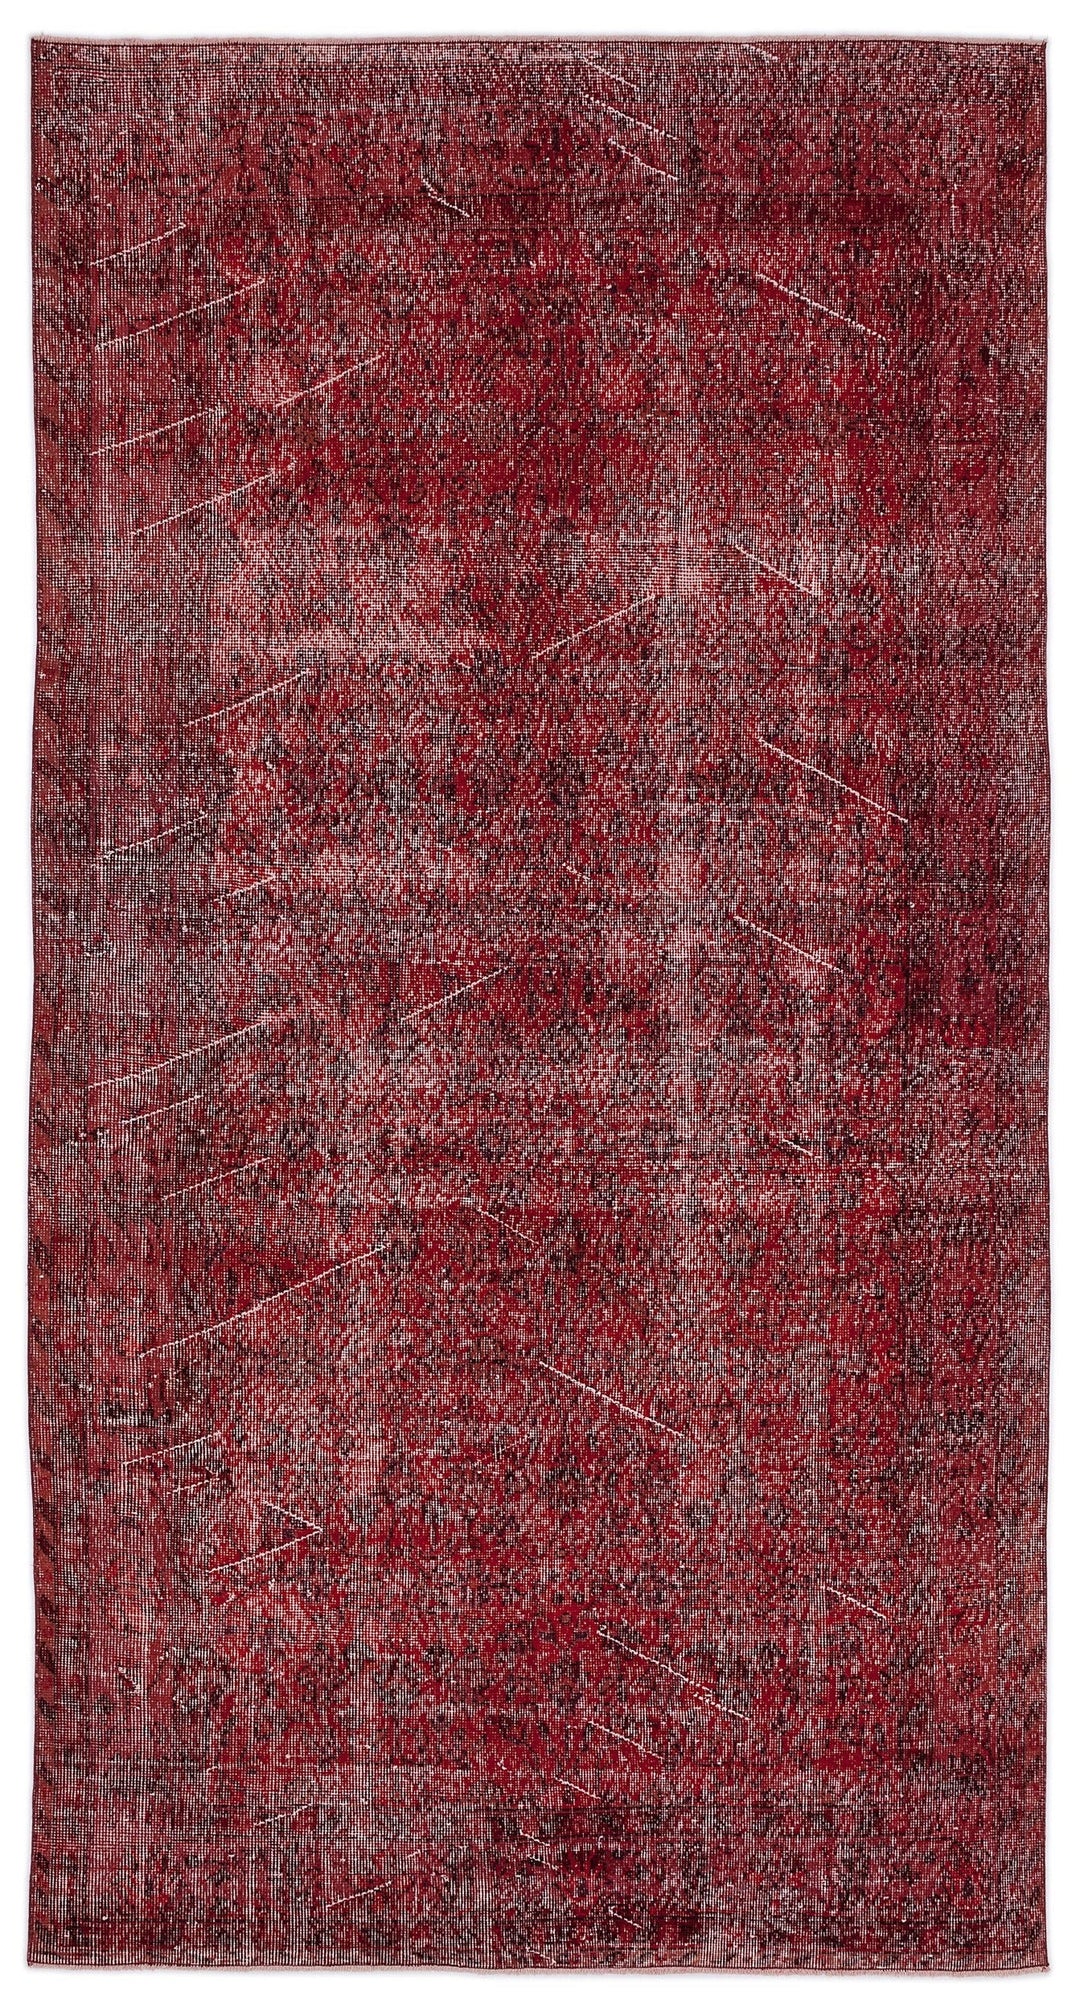 Athens Red Tumbled Wool Hand Woven Carpet 167 x 308